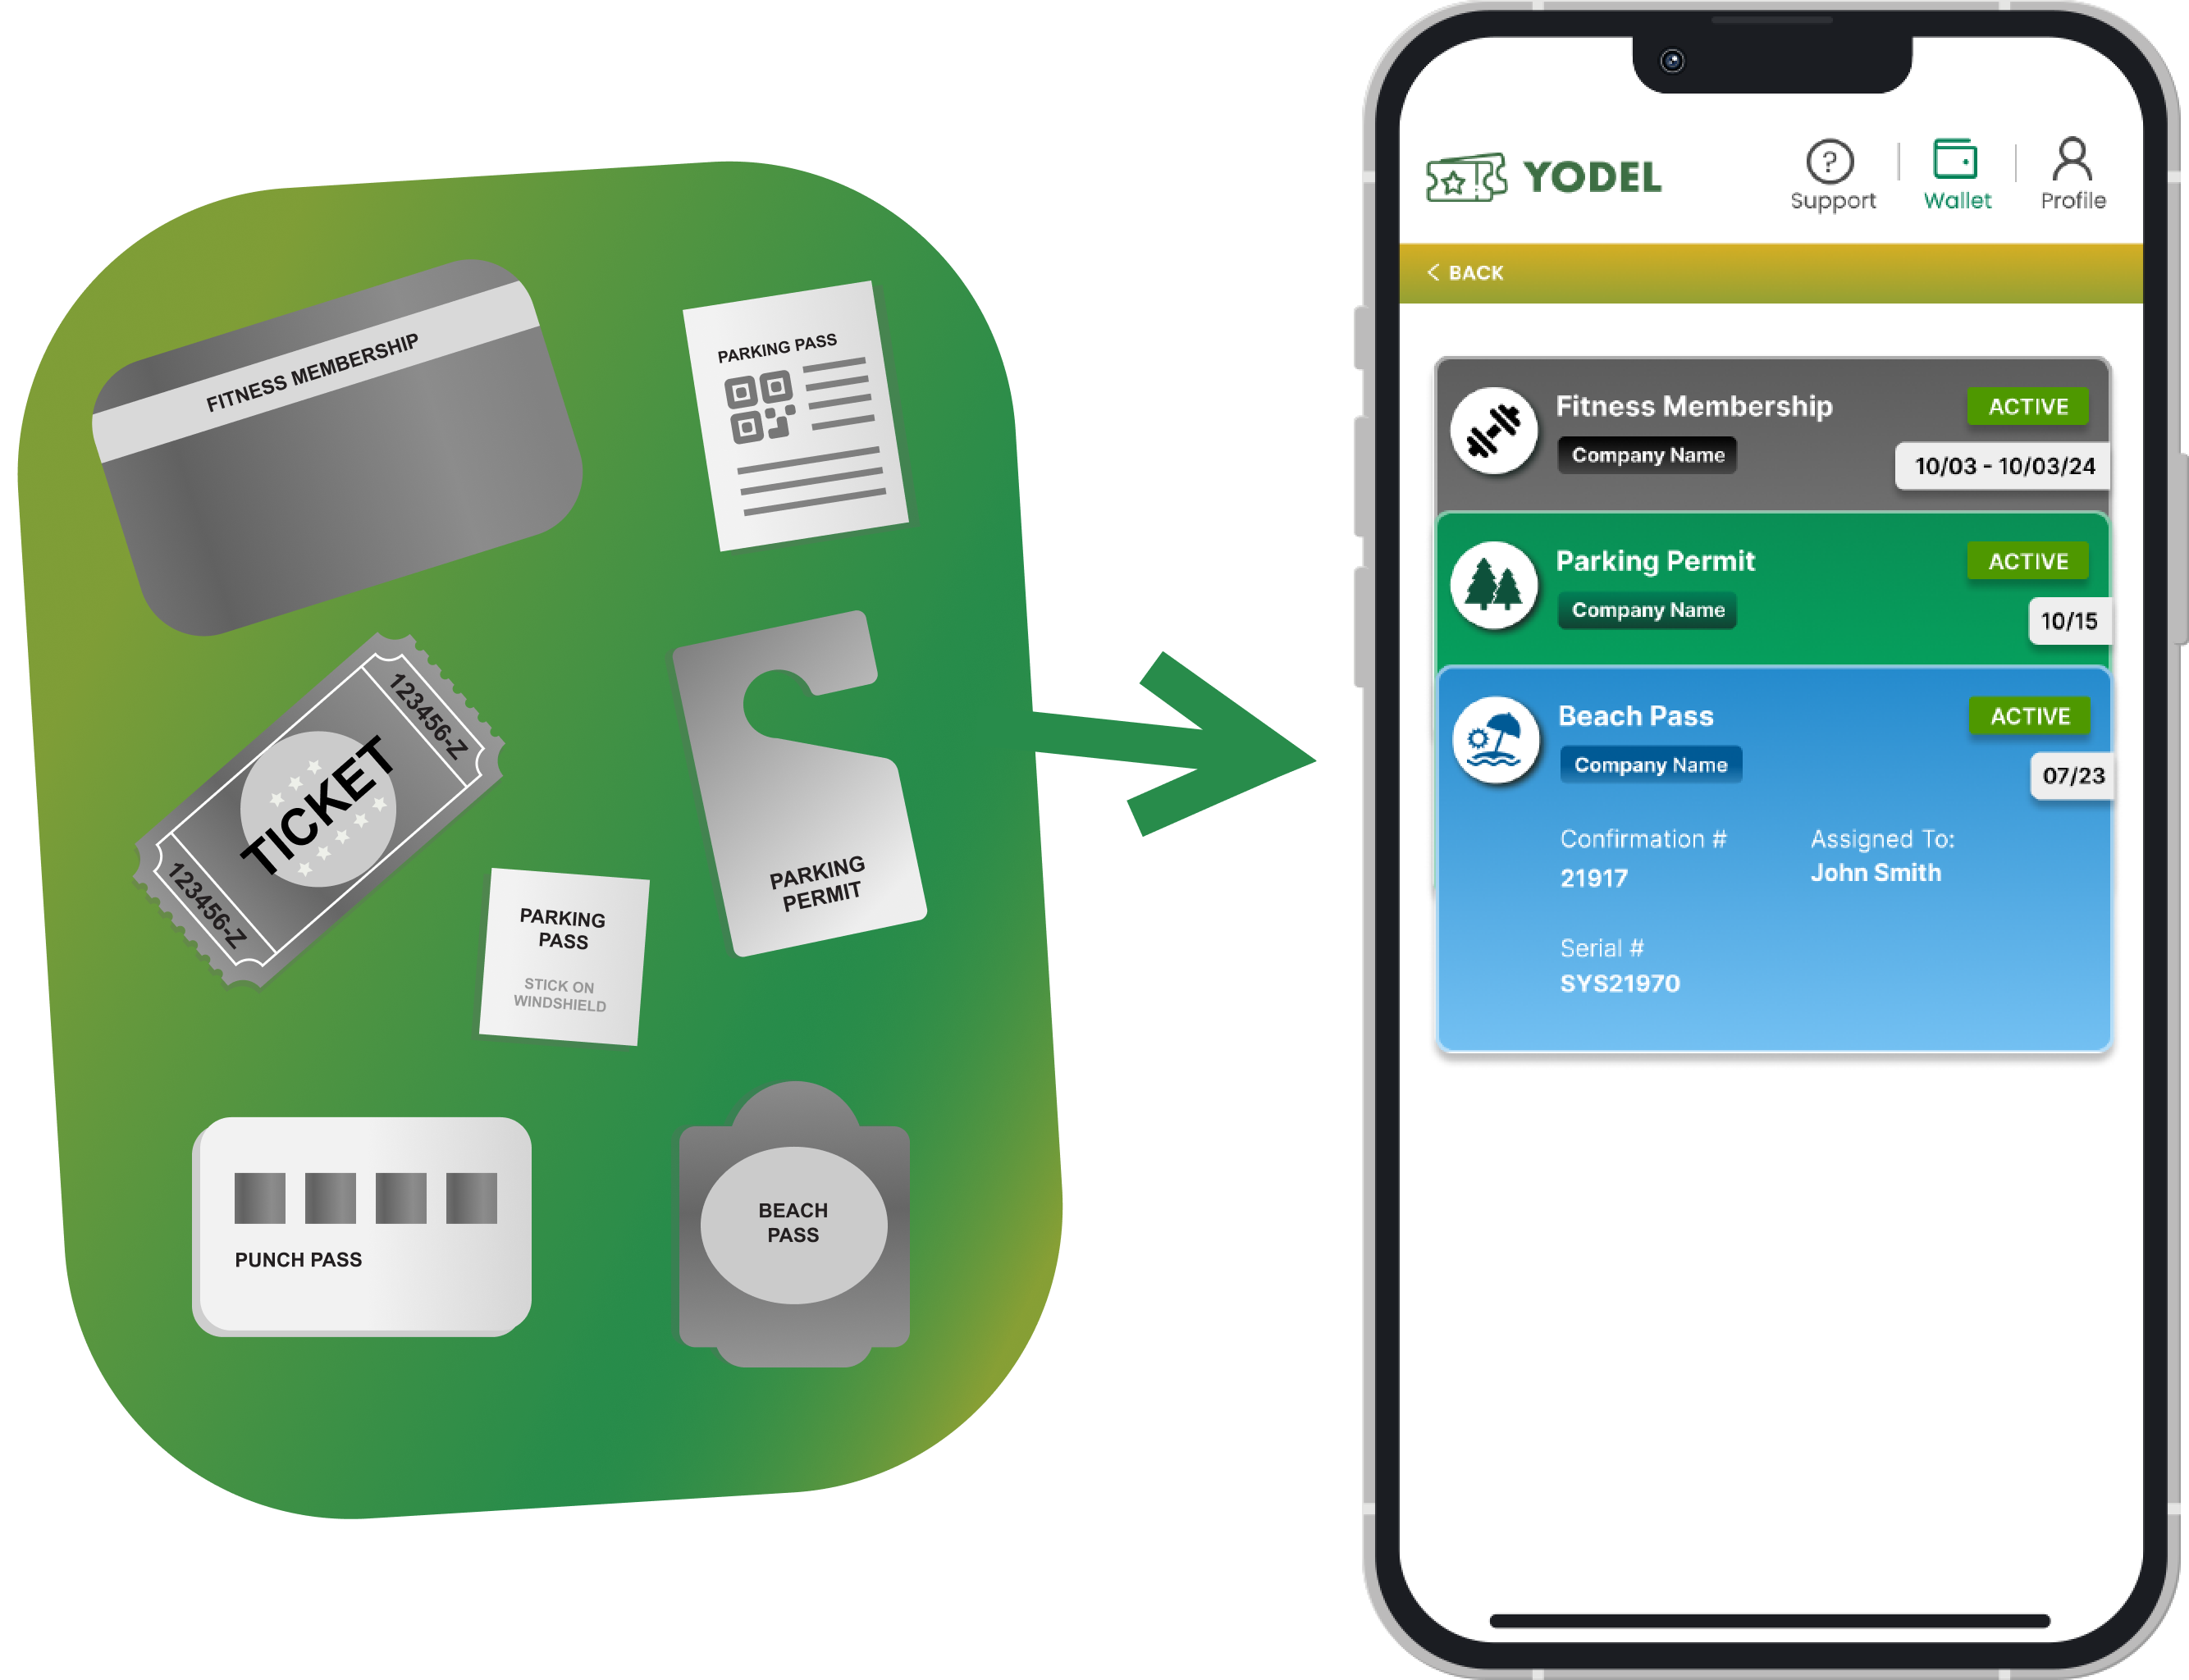 Yodel E-Card Replaces Paper and Plastic Passes